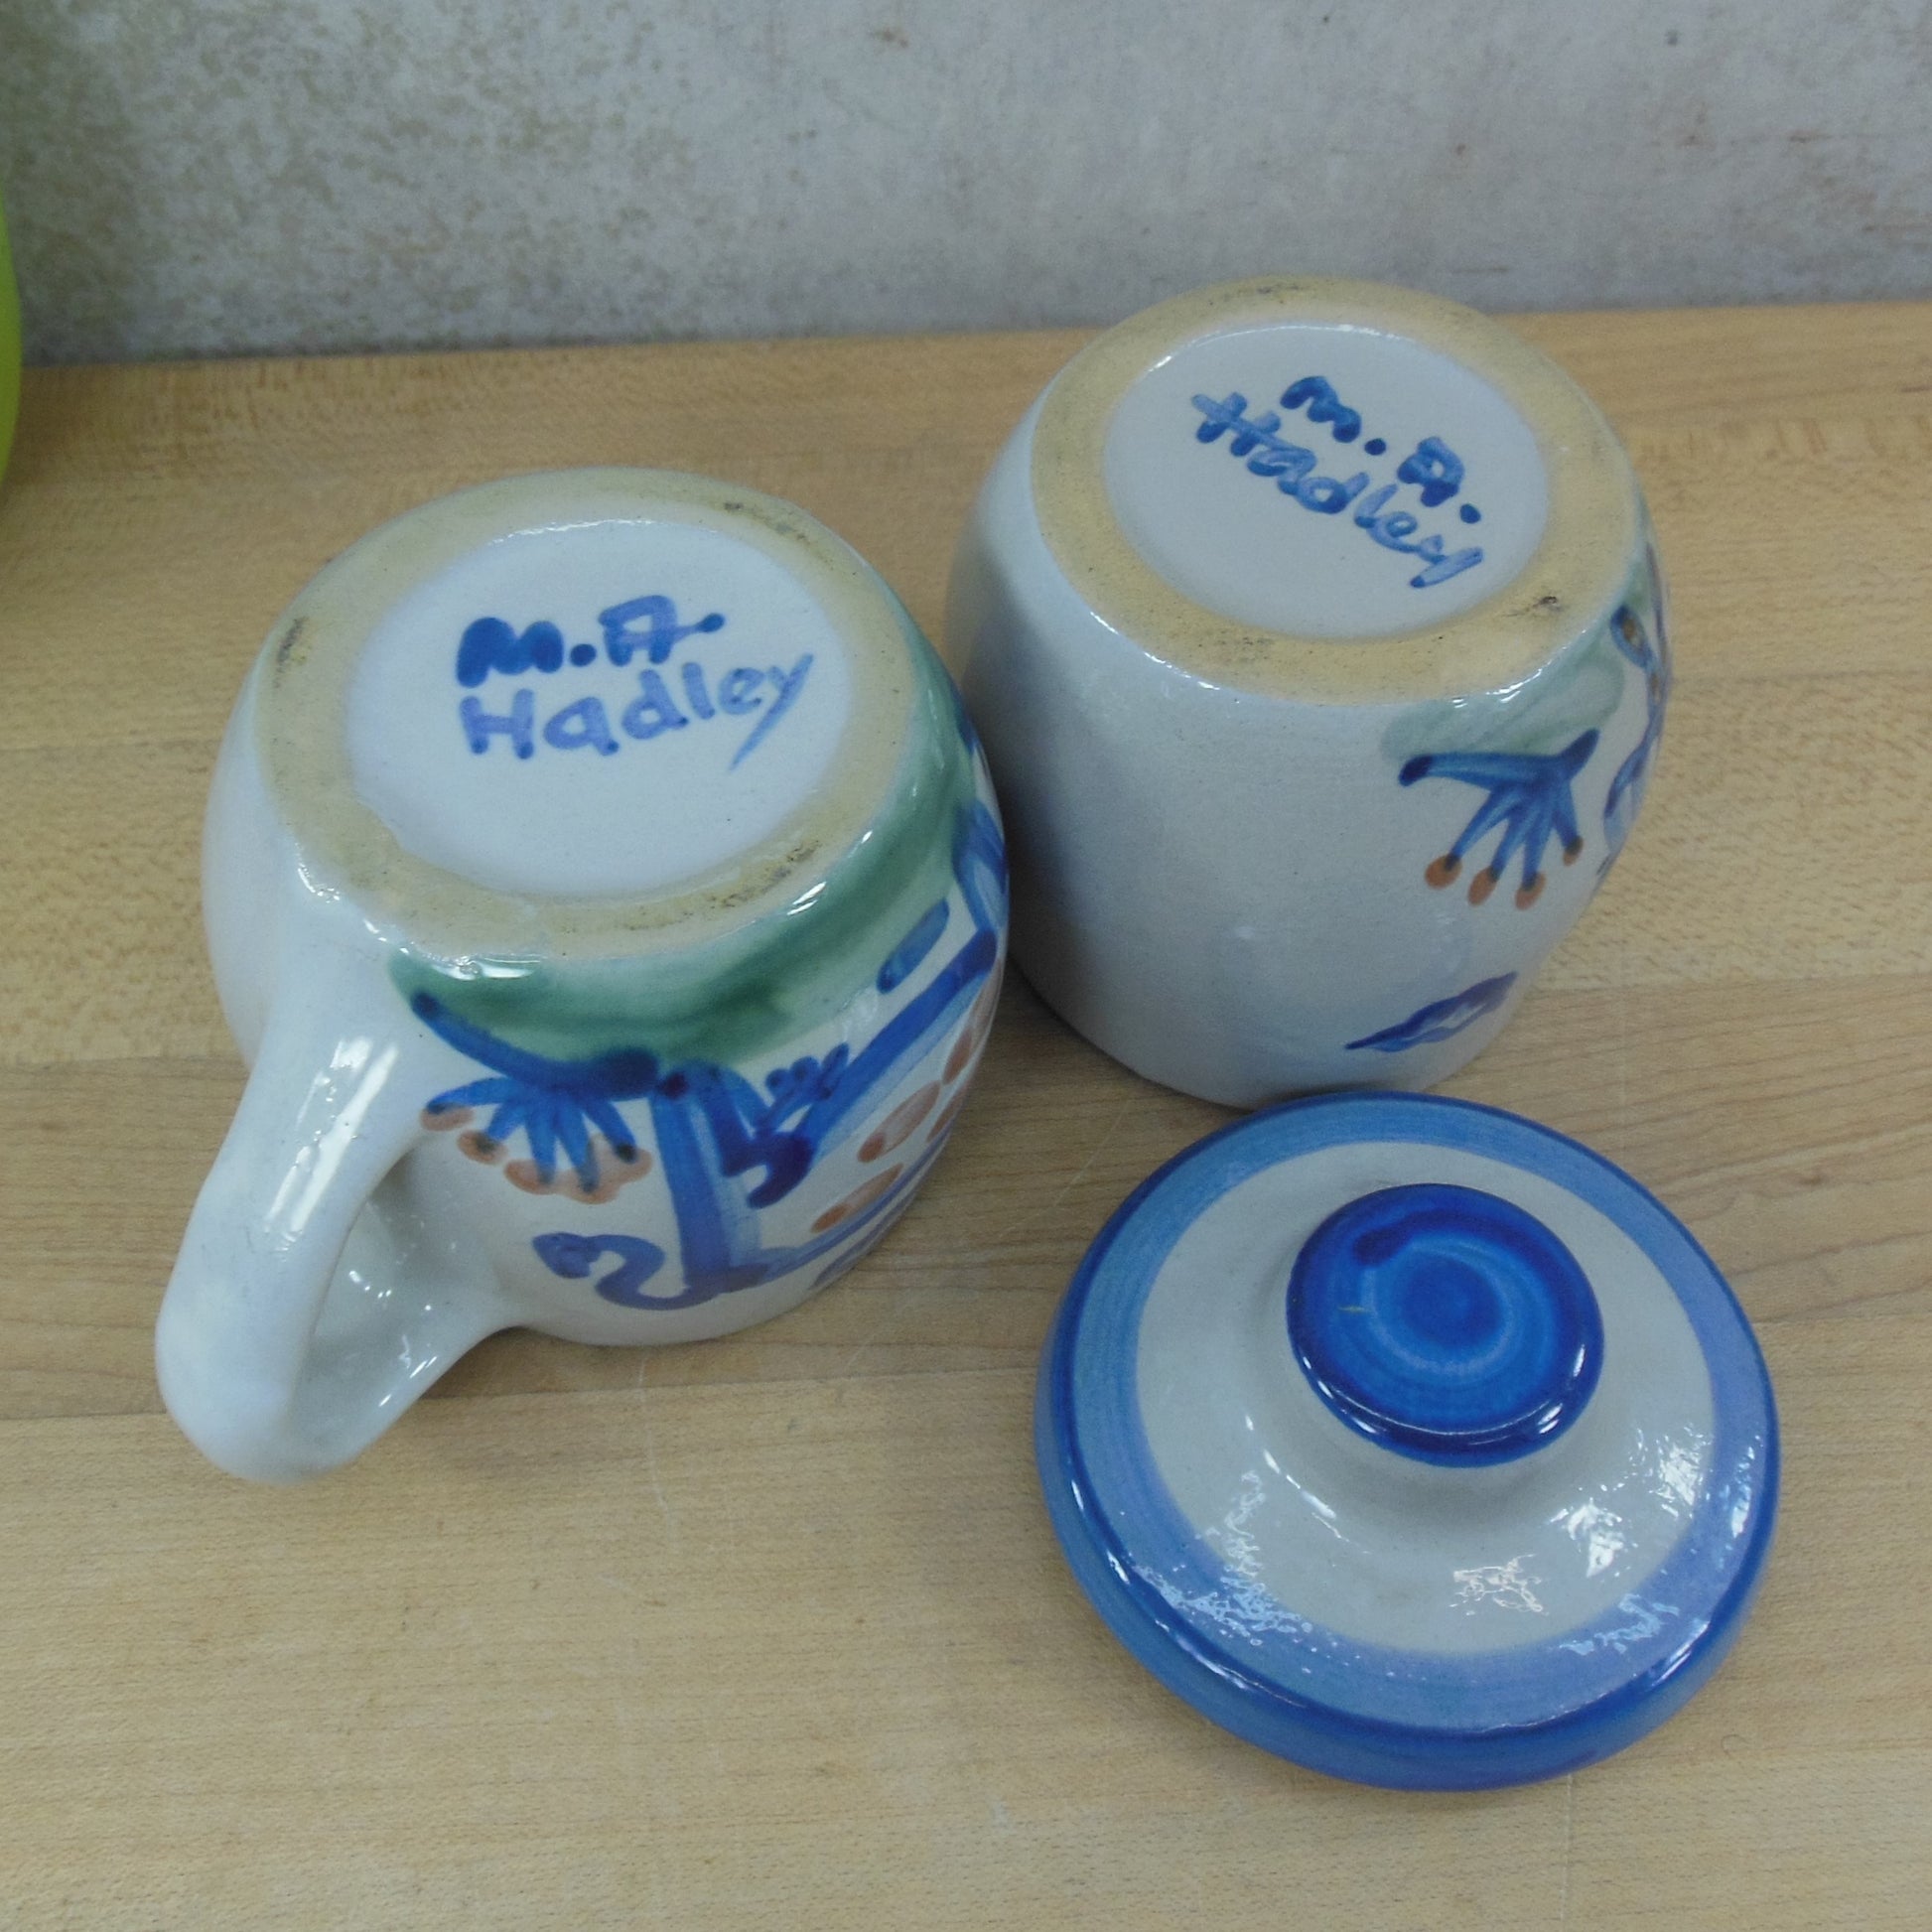 M.A. Hadley Pottery Sugar Bowl Creamer Set Country Cow Wife Used